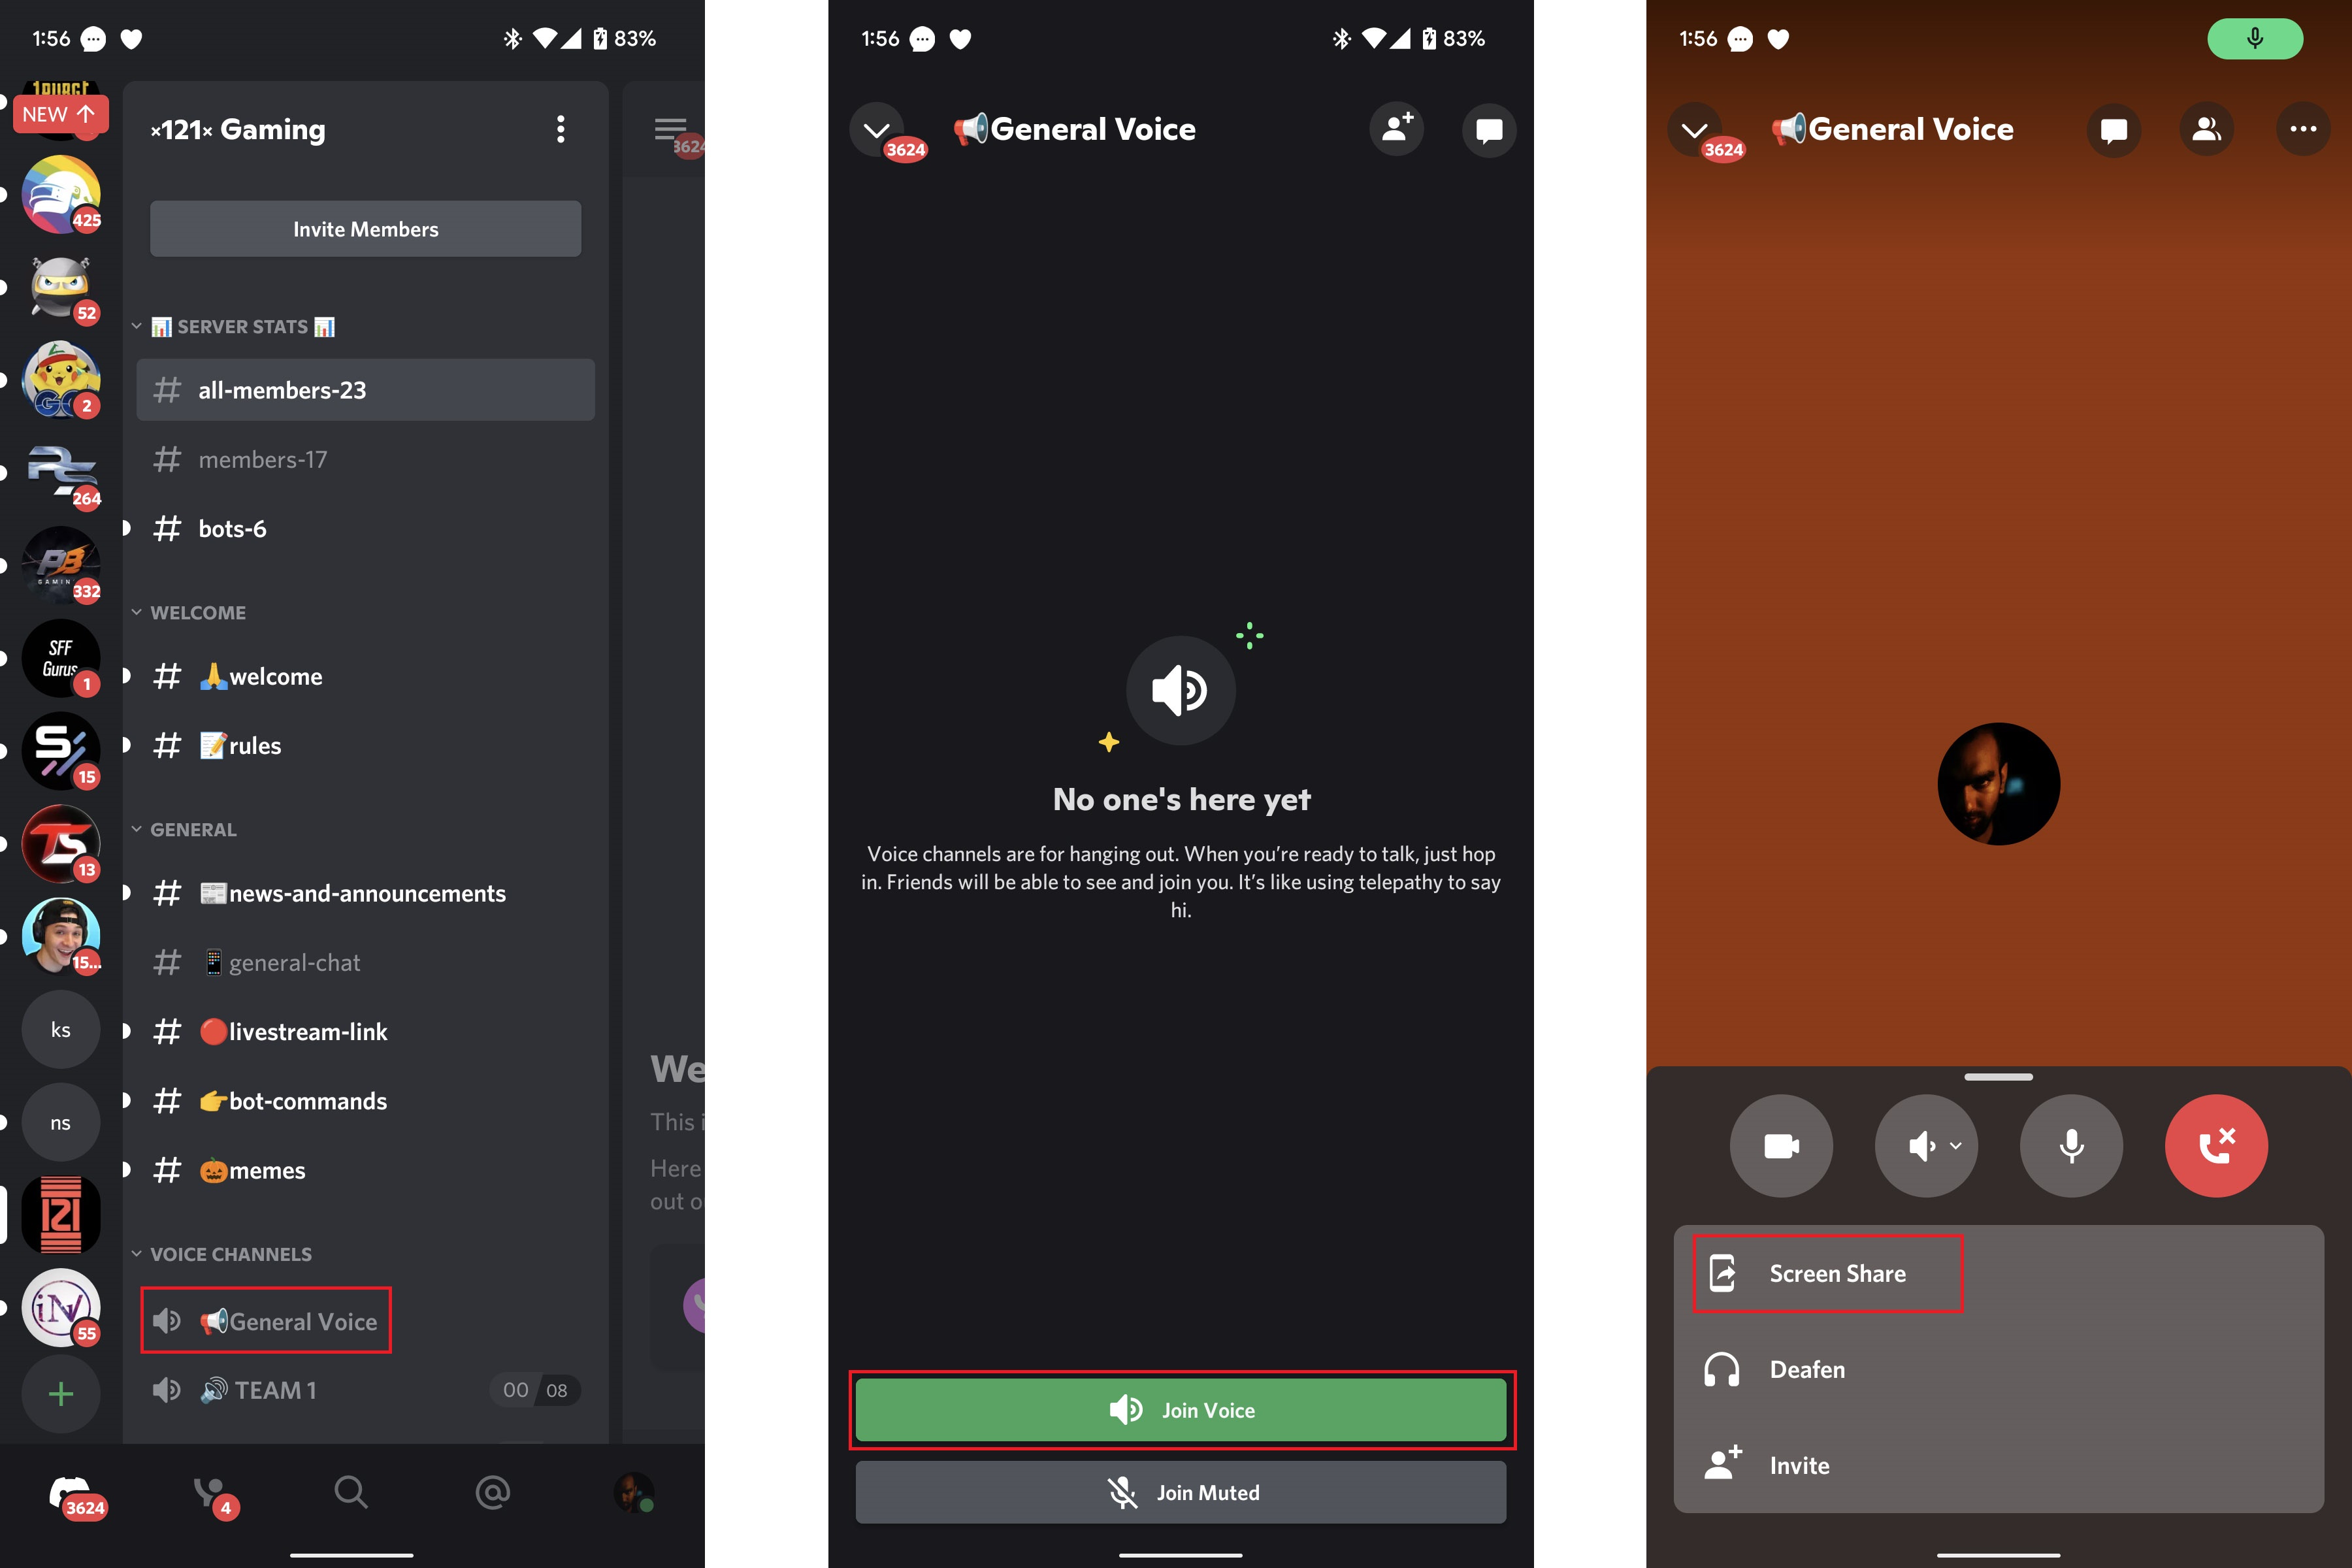 Screenshots of how to stream Netflix using Discord on your smartphone.